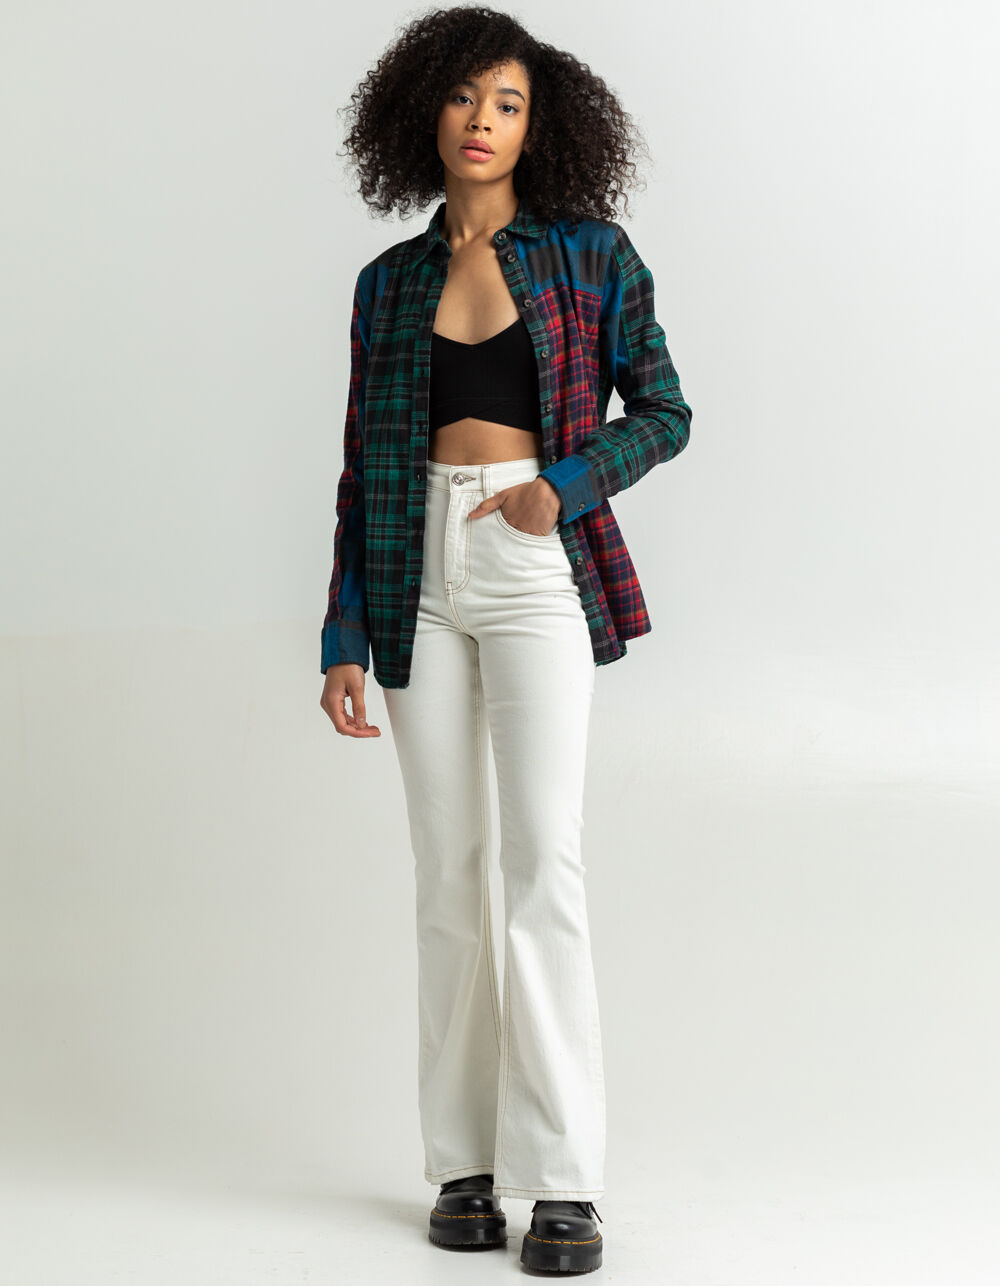 BDG Urban Outfitters Nicole Womens Spliced Flannel Shirt - MULTI | Tillys